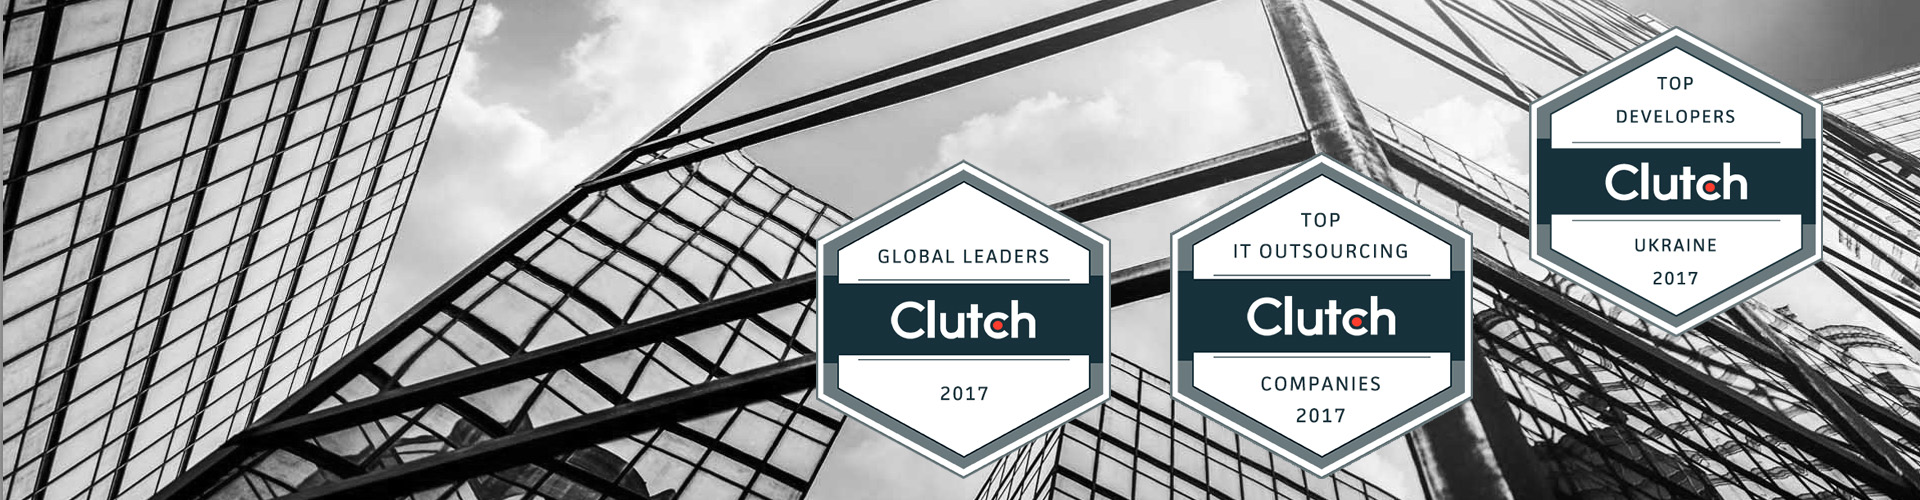 Clutch review 2017